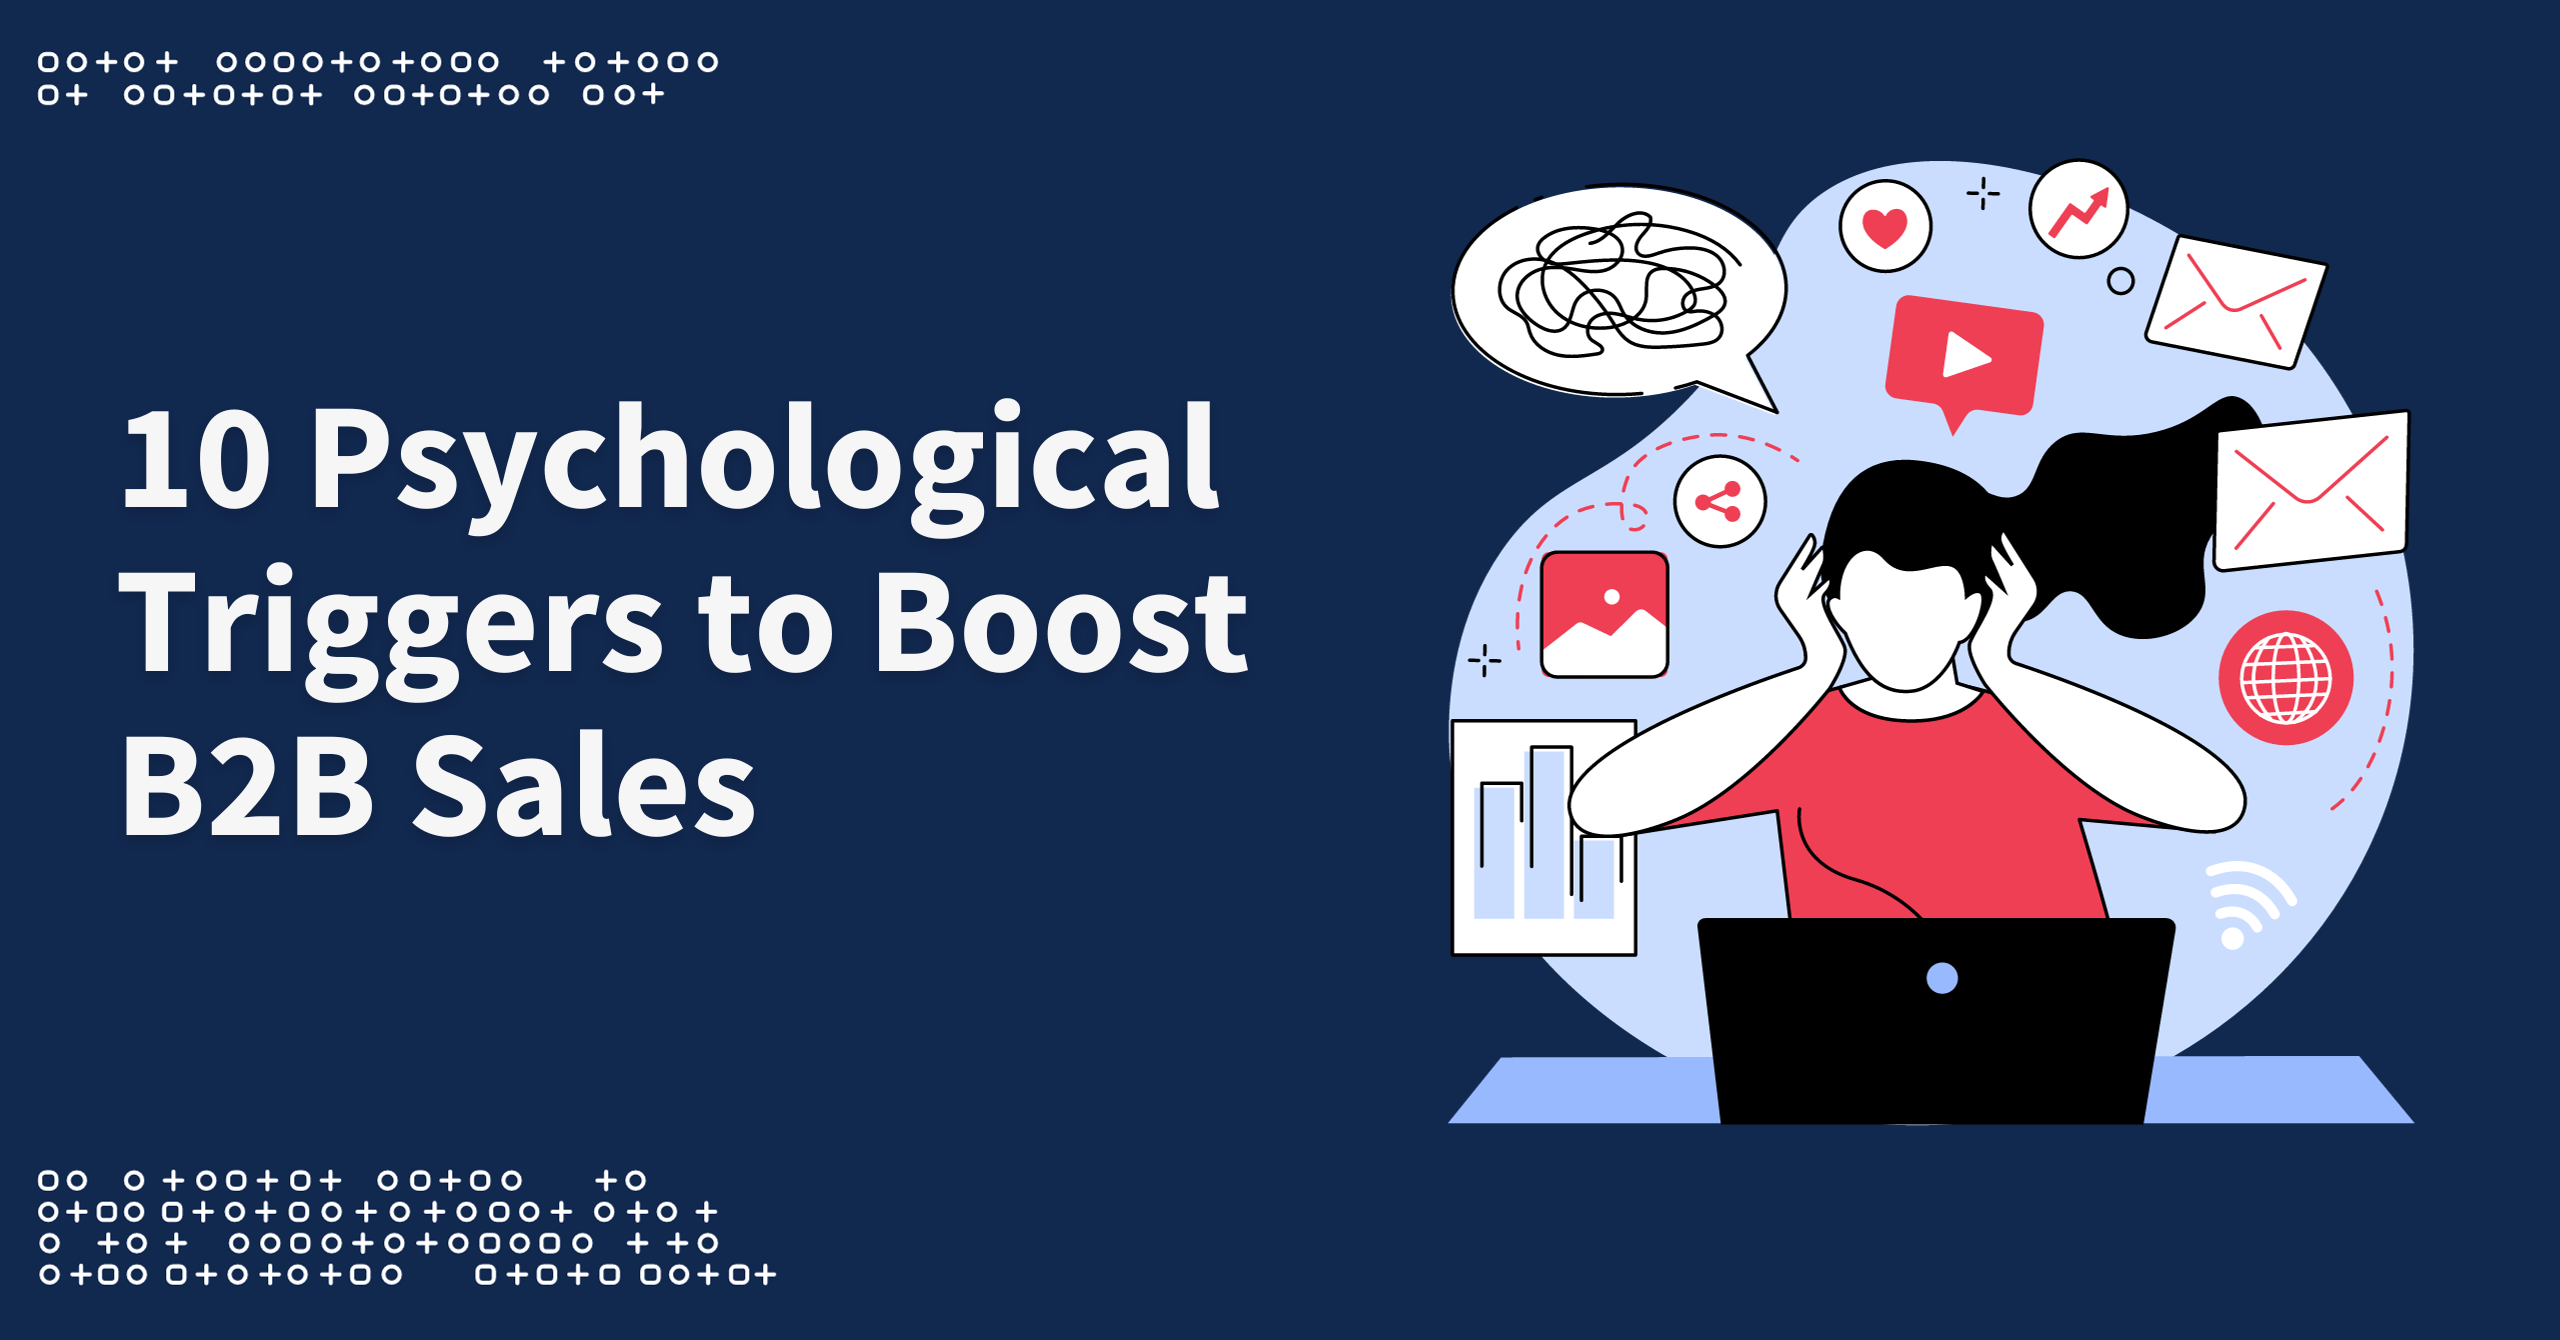 10 Psychological Triggers to Boost B2B Sales